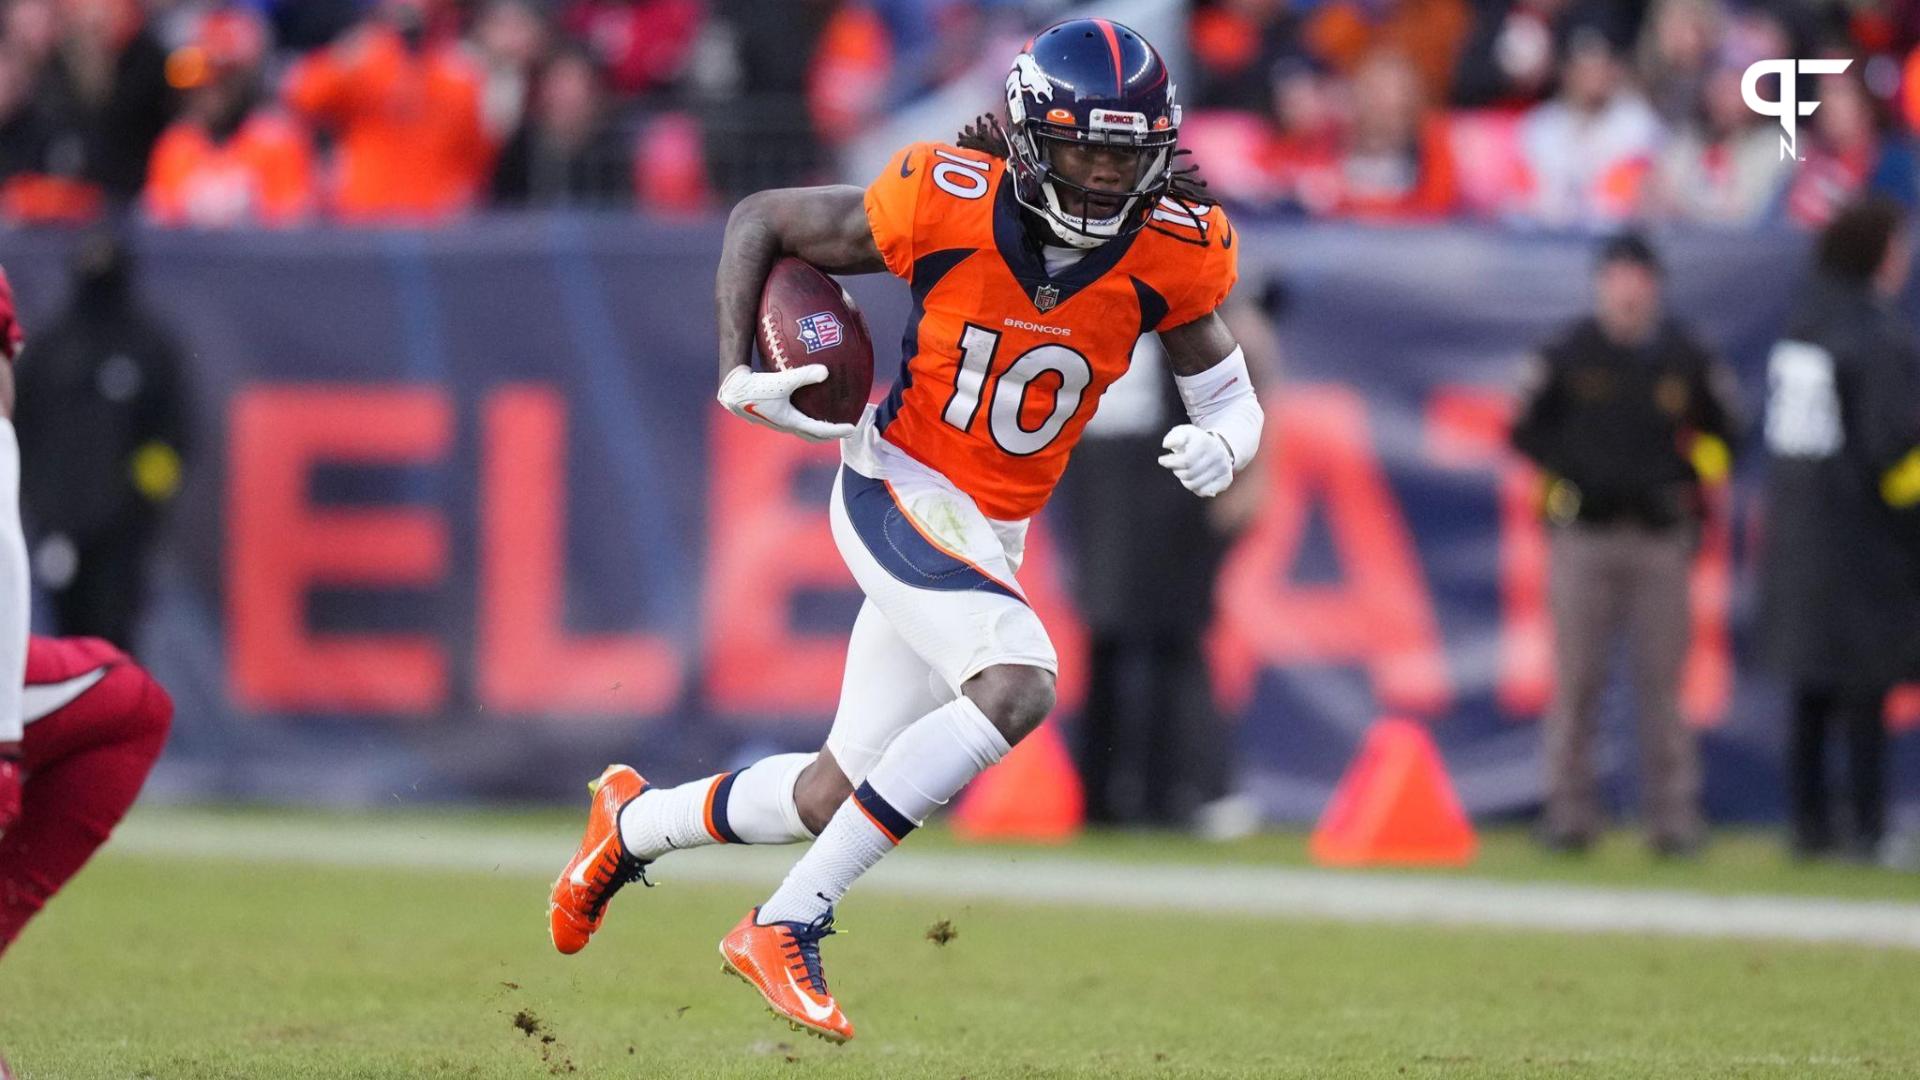 Jerry Jeudy (10) runs after a reception in the second half against the Arizona Cardinals at Empower Field at Mile High.